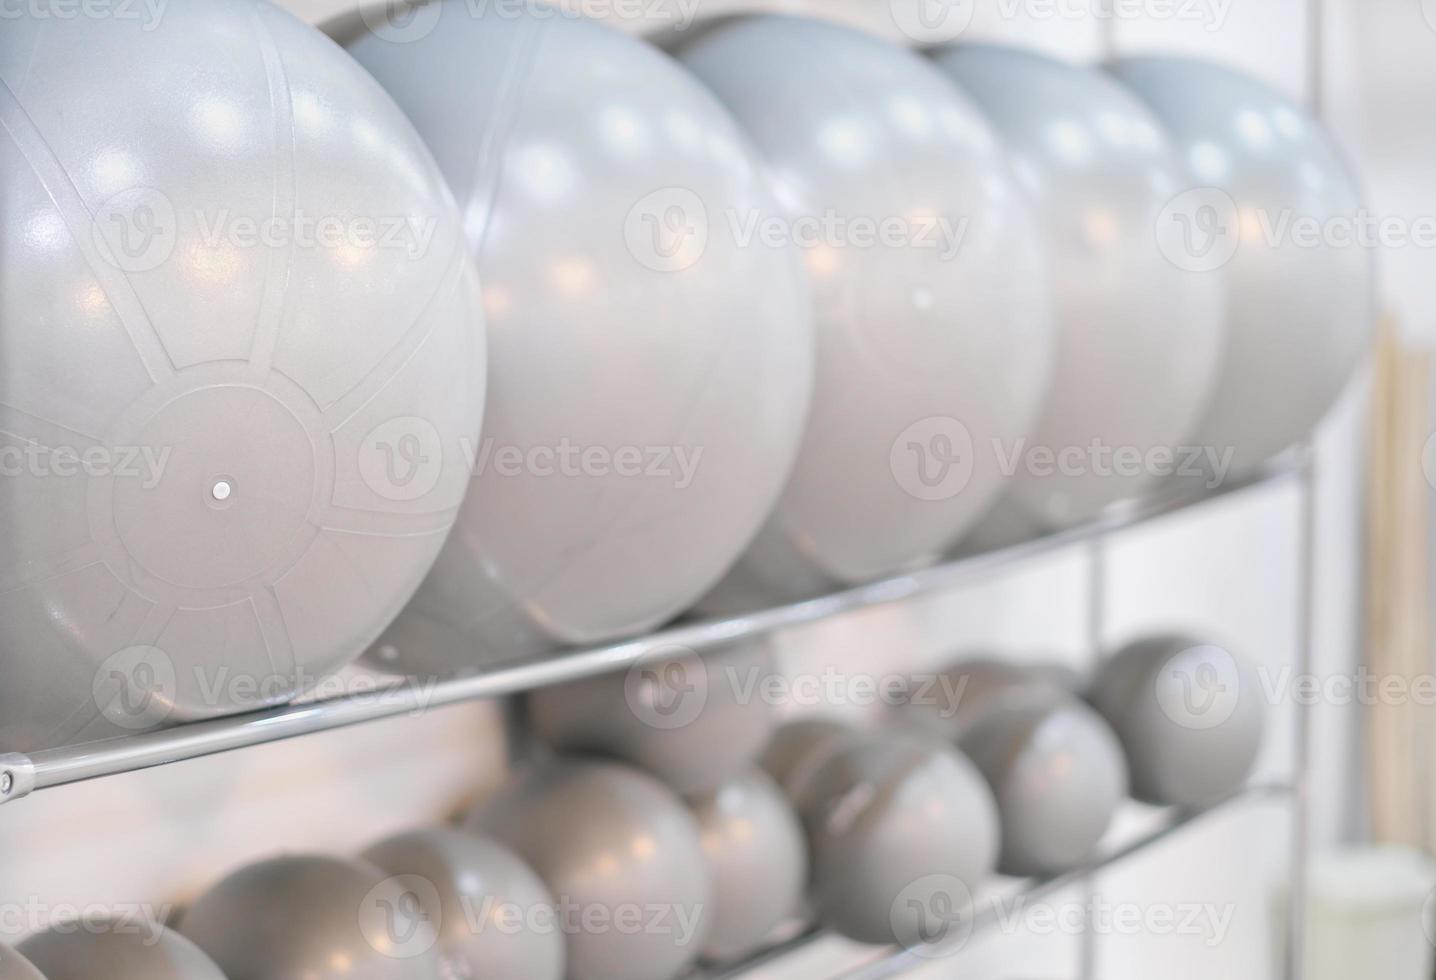 physical therapy fitballs on a shelf in a rehabilitation center. pilates and post traumatic exercises equipment. back pain care, stretching and workout photo